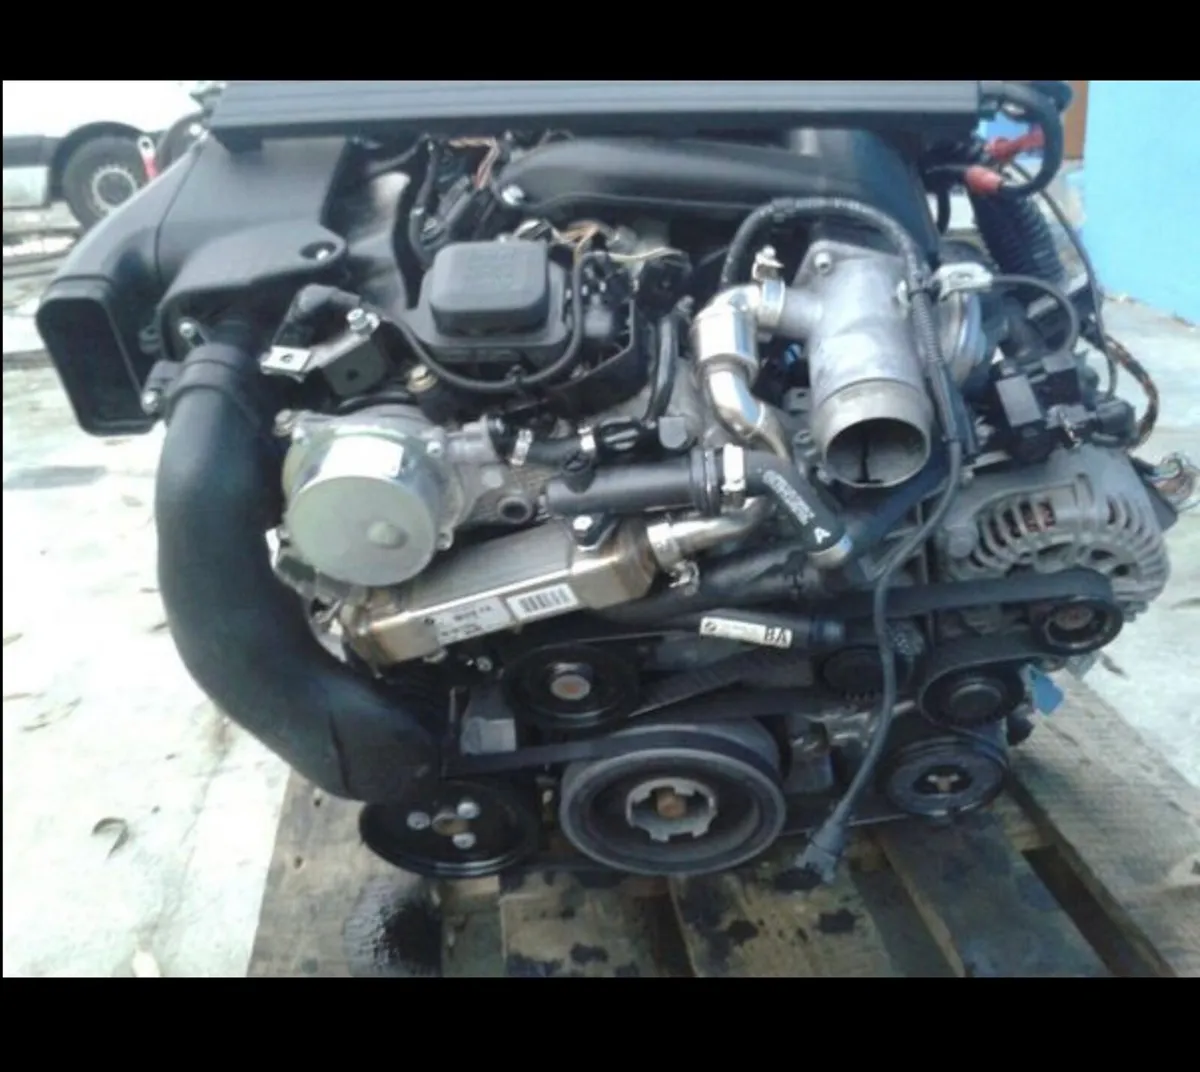 Engines For Sale Near Me - BMW M47 ENGINE FOR SALE ​​Vehicle Brand: BMW  Engine Fuel Type: Diesel Engine Size: ​ Engine Model: Engine Code: M47 #BMW  #M47 #bmwn46b20beengineforsale Engines For Sale